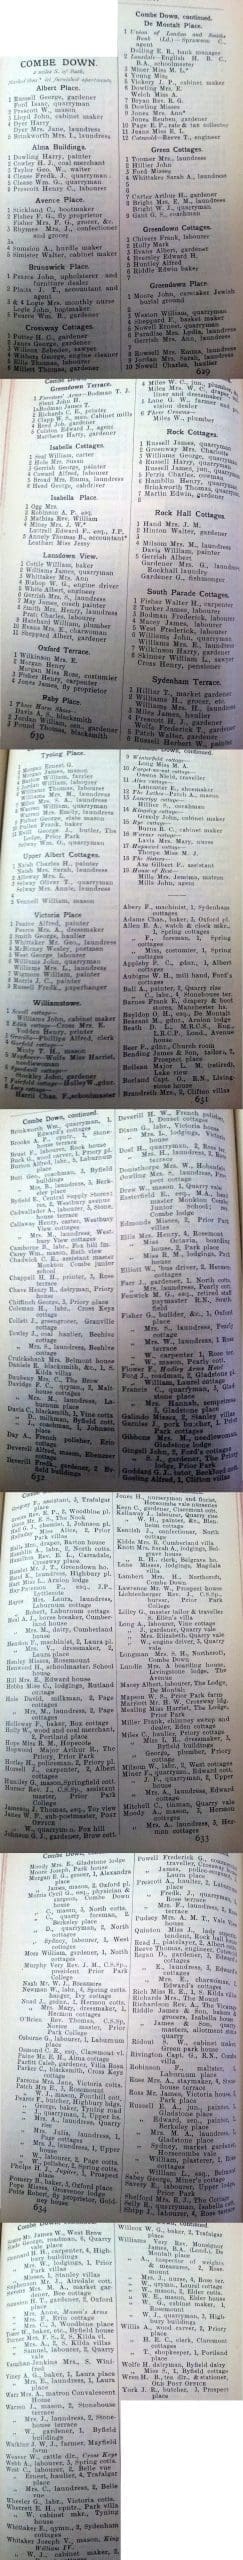 1906 post office directory for combe down